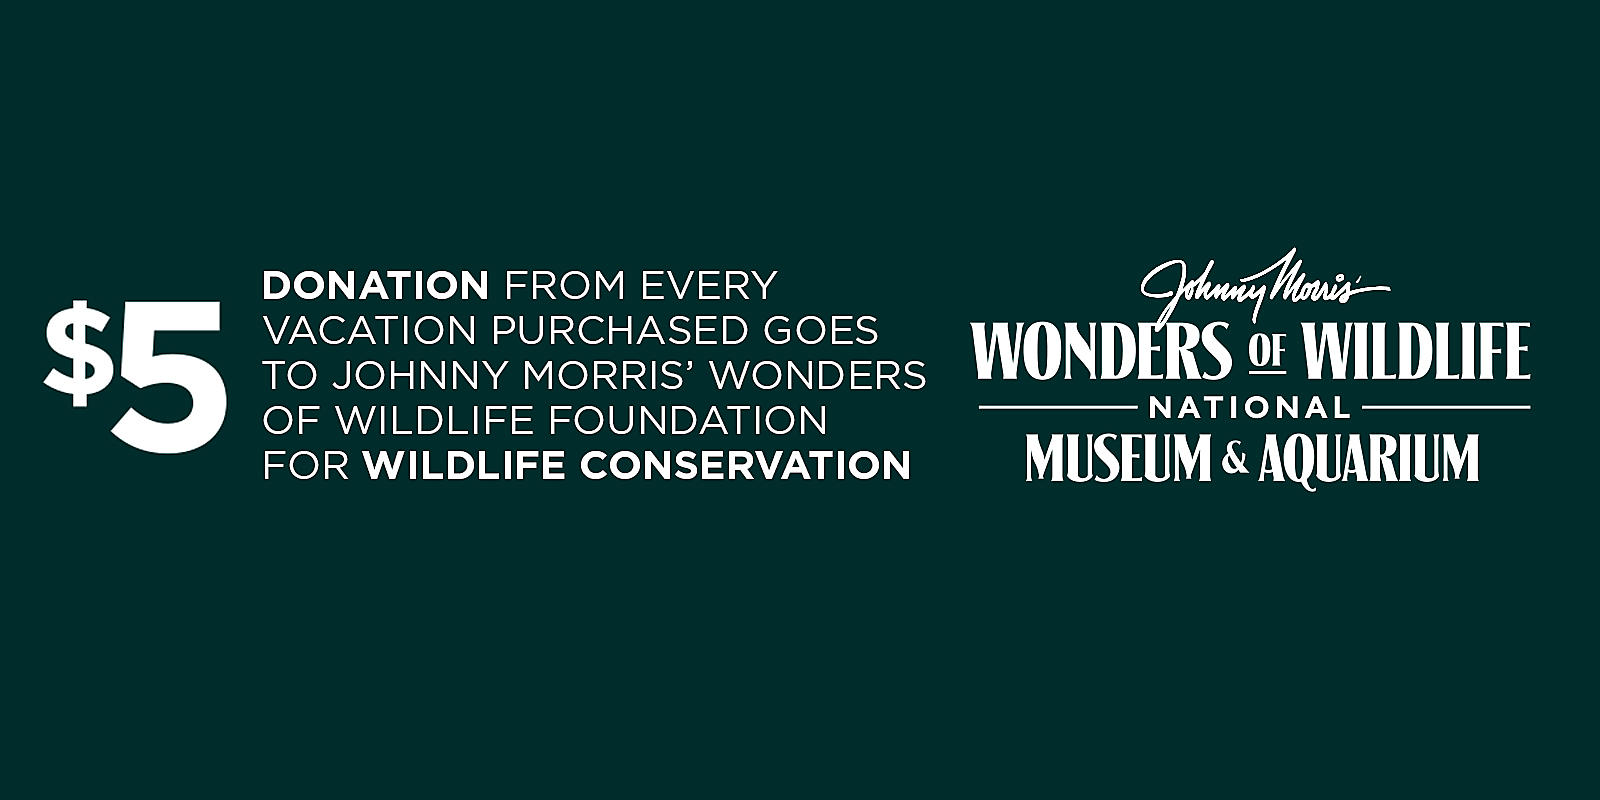 $5 donation from every vacation purchased goes to wildlife conservation